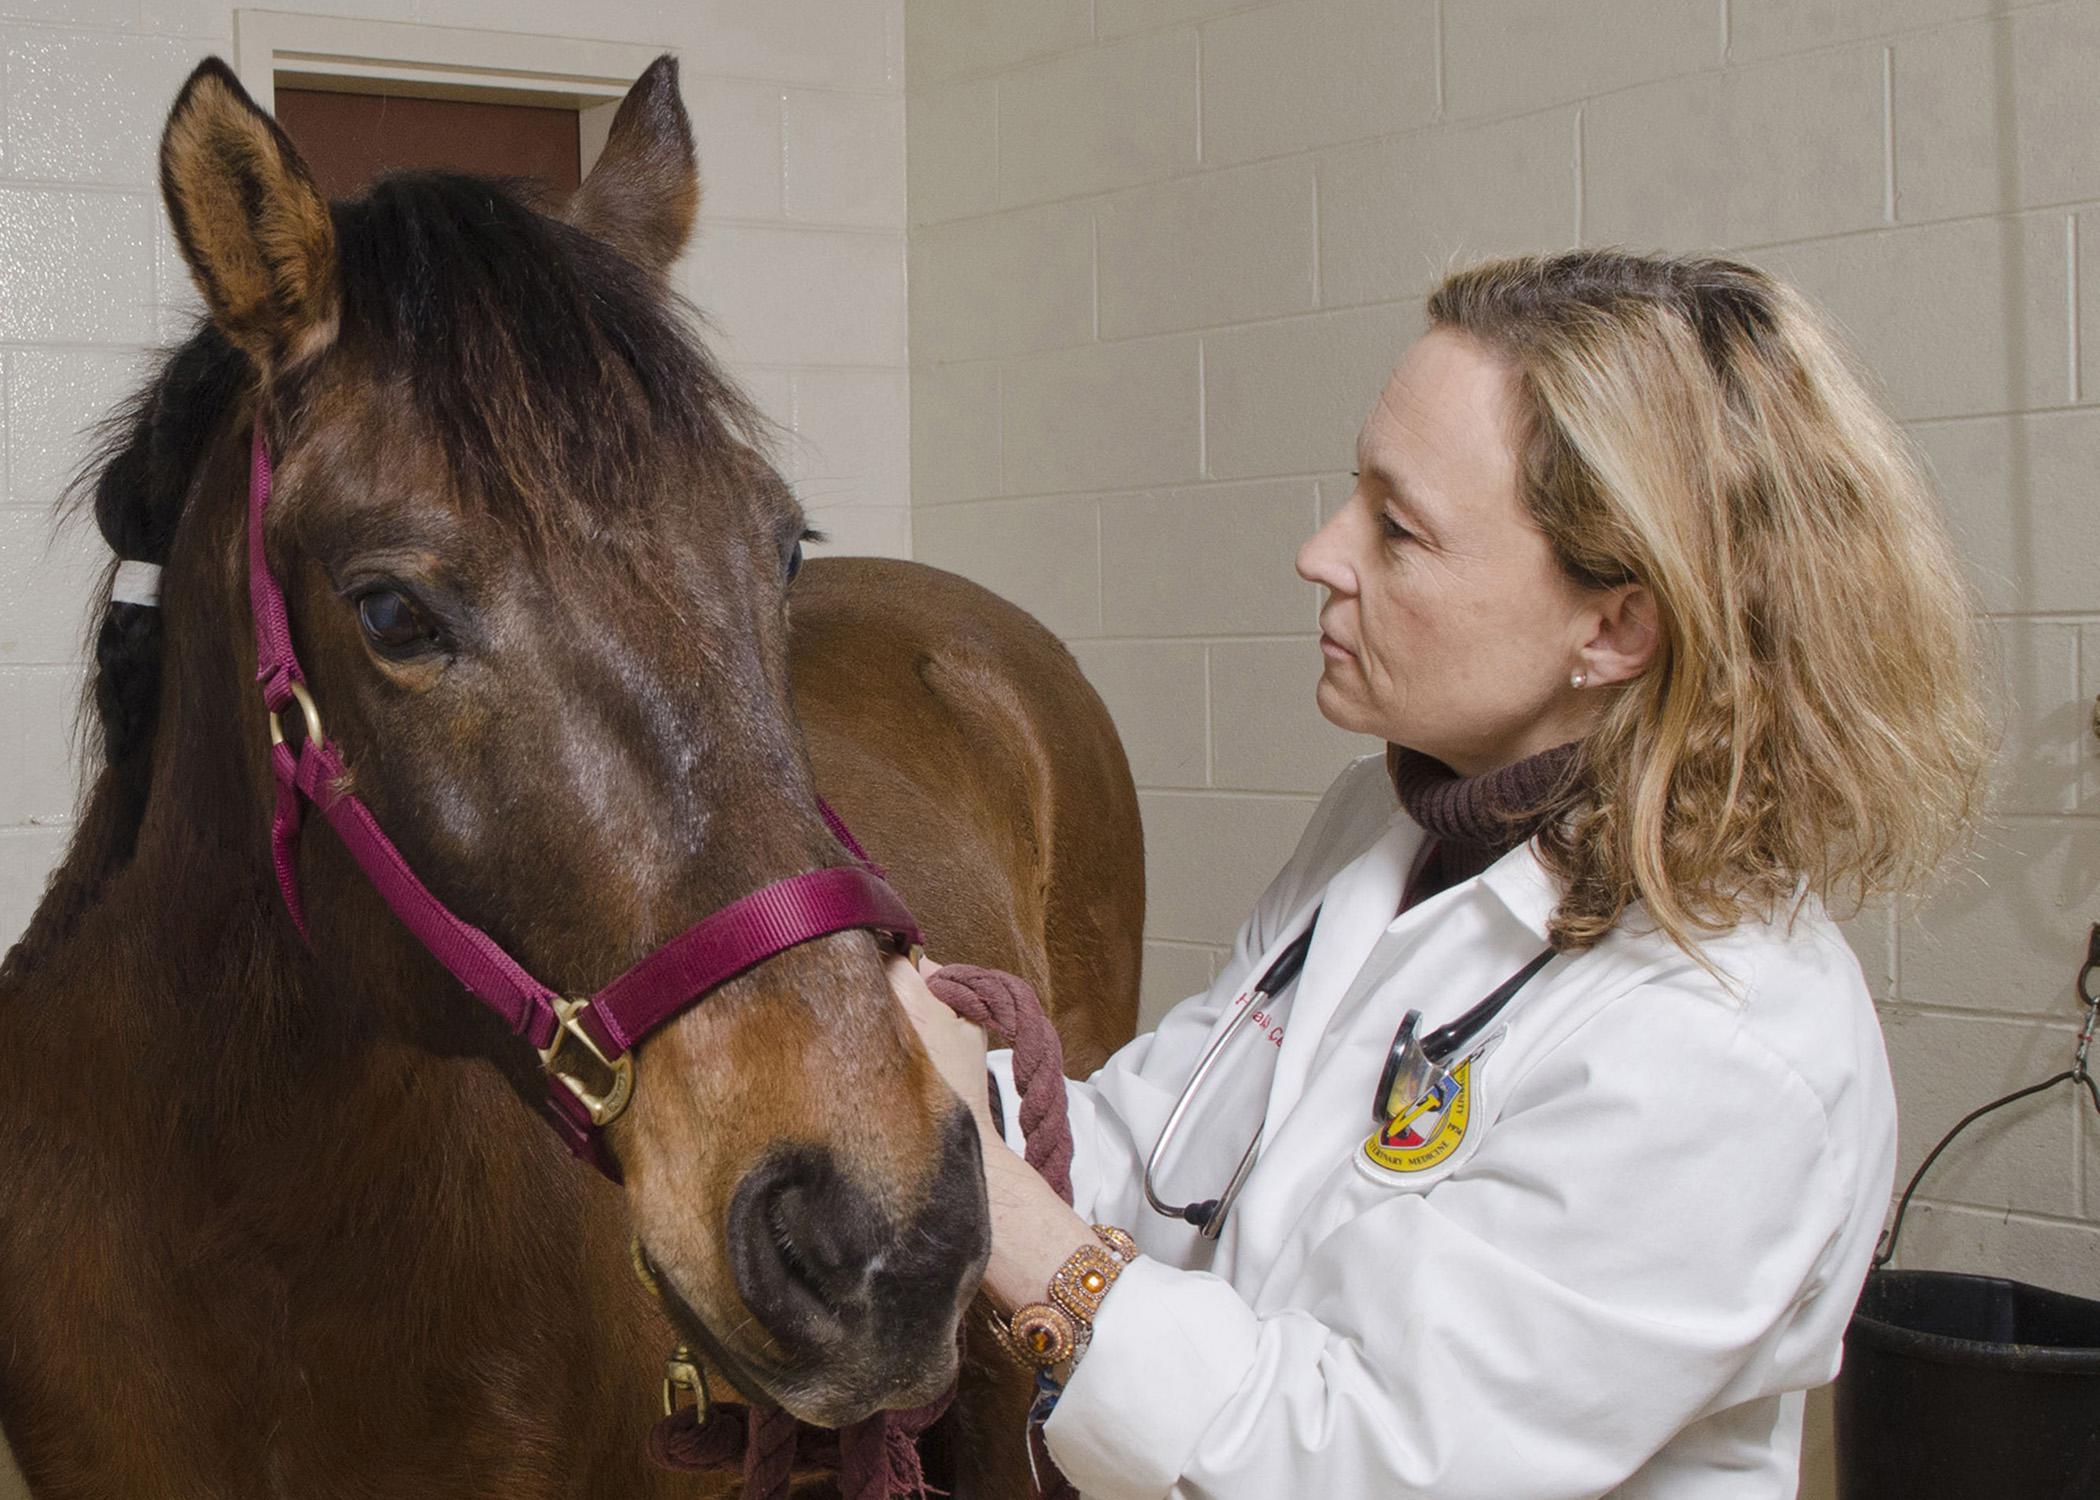 Dr. Cyprianna "Chipper" Swiderski's childhood love for horses put her on a career path including nearly 25 years as an equine practitioner and now as a faculty member in the Mississippi State University College of Veterinary Medicine. (Photo by MSU College of Veterinary Medicine/Tom Thompson)